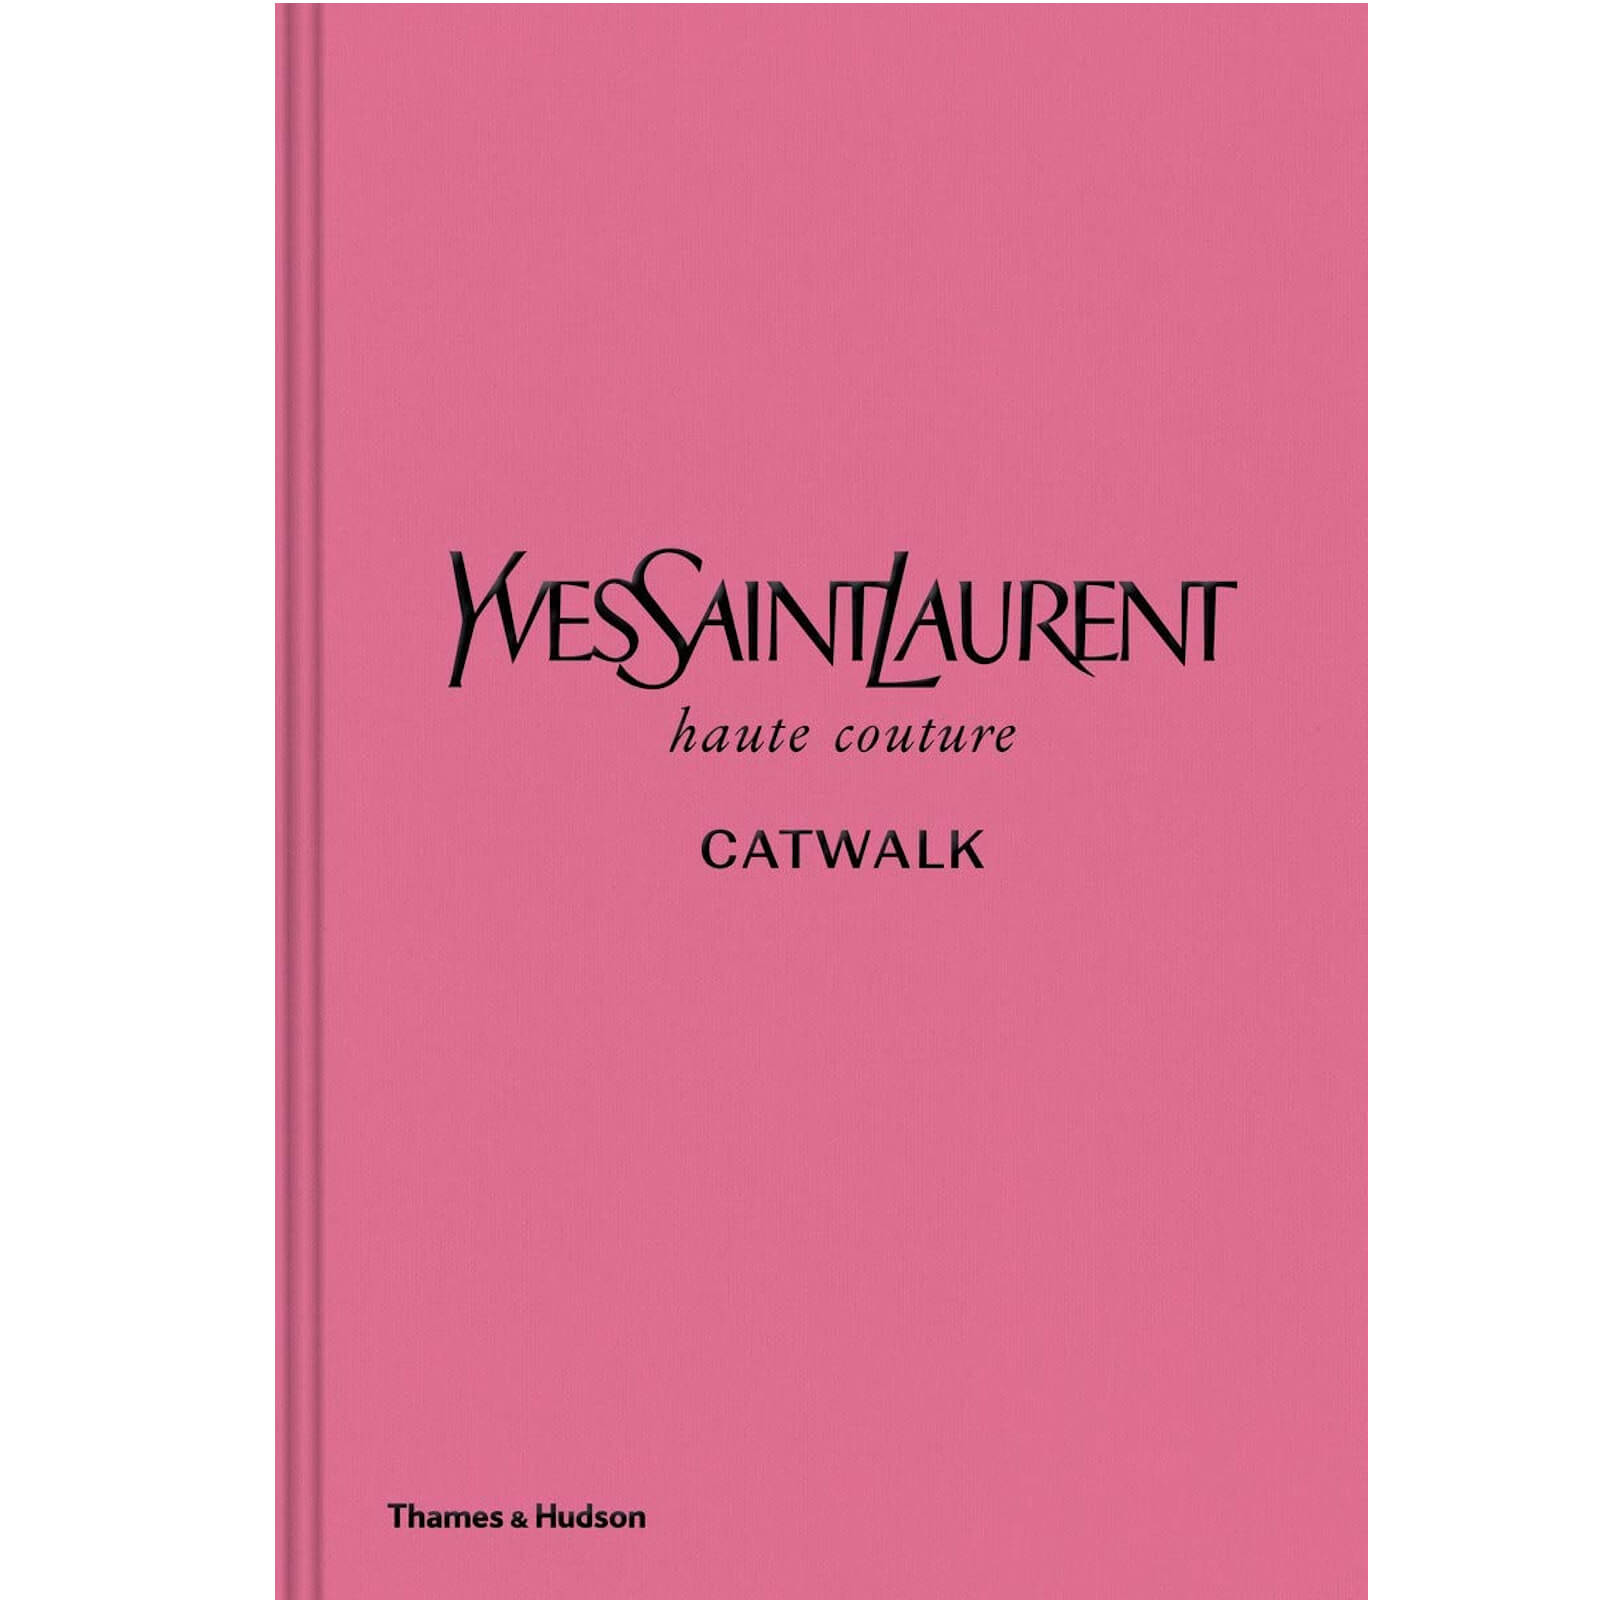 Thames and Hudson Ltd Yves Saint Laurent Catwalk - The Complete Haute Couture Collections